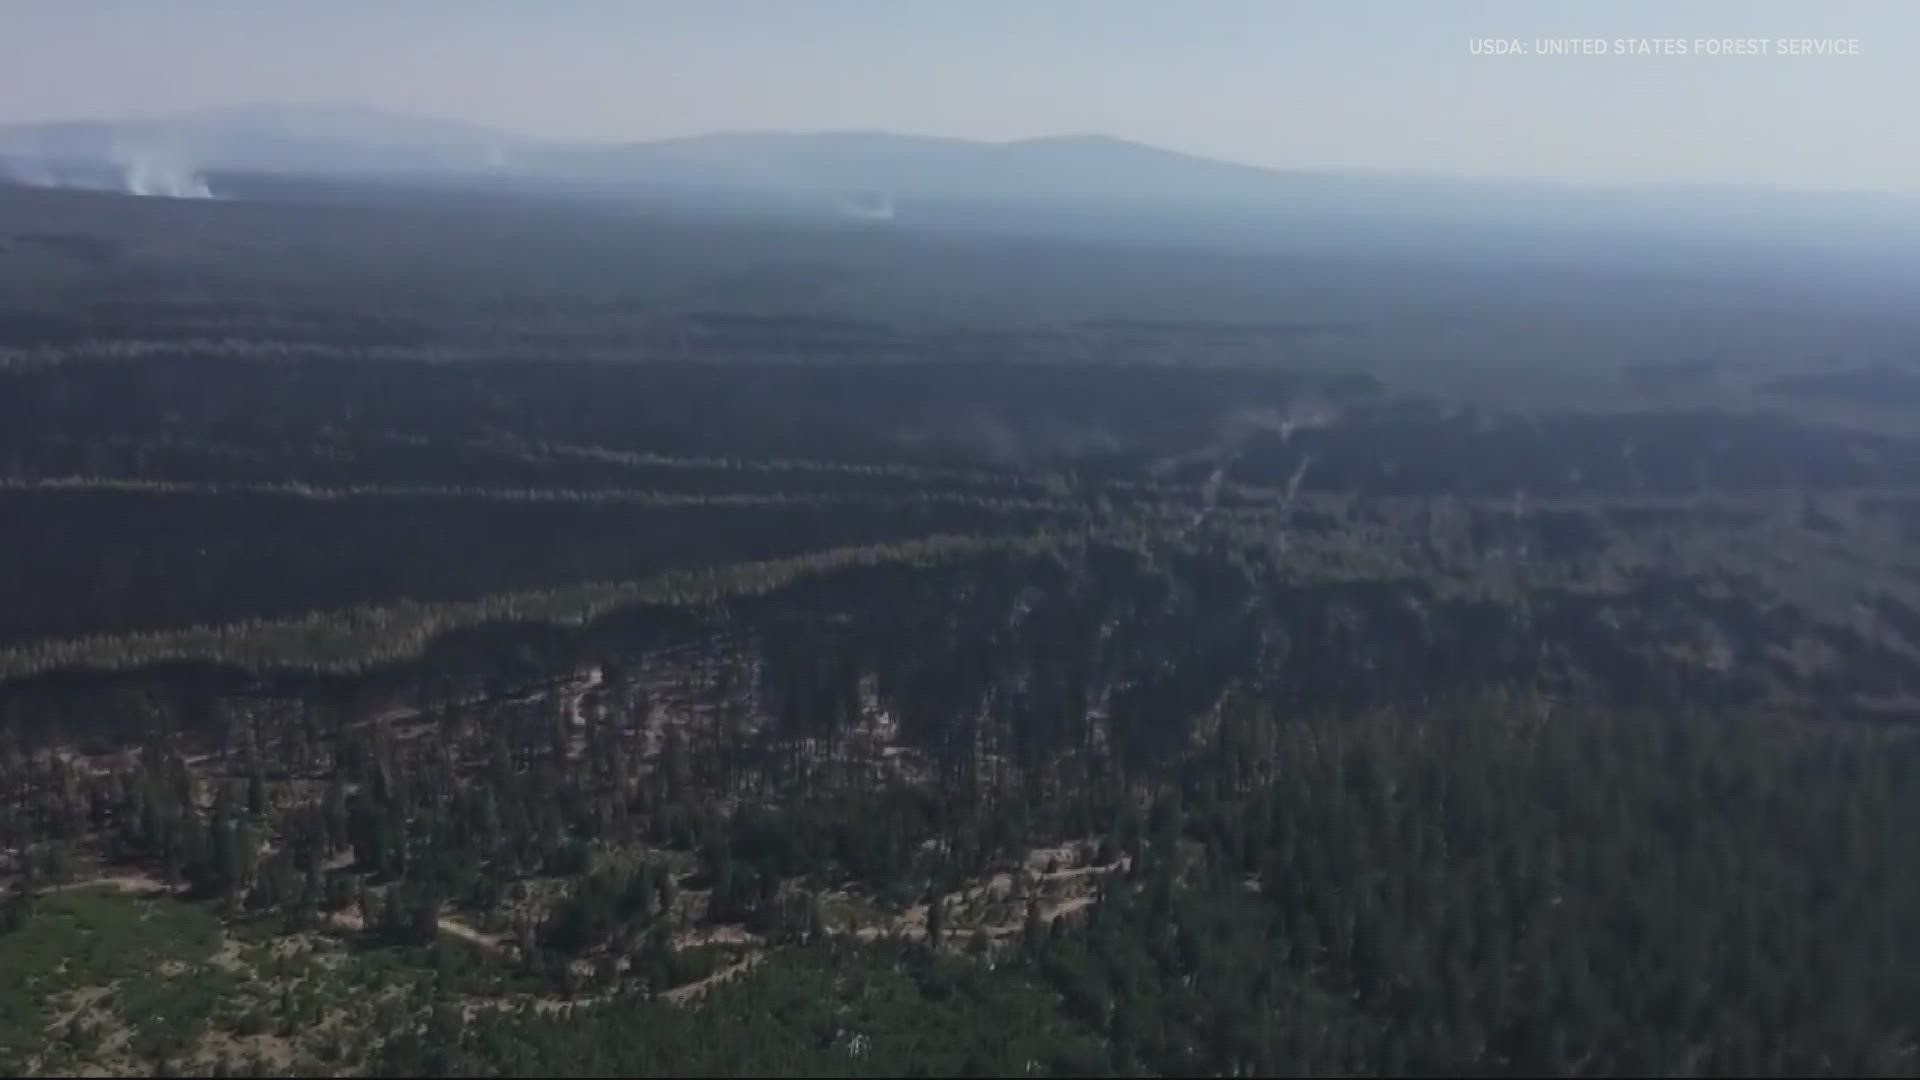 Even with Oregon’s largest wildfire now contained, fire season isn’t over and many fires are still burning.